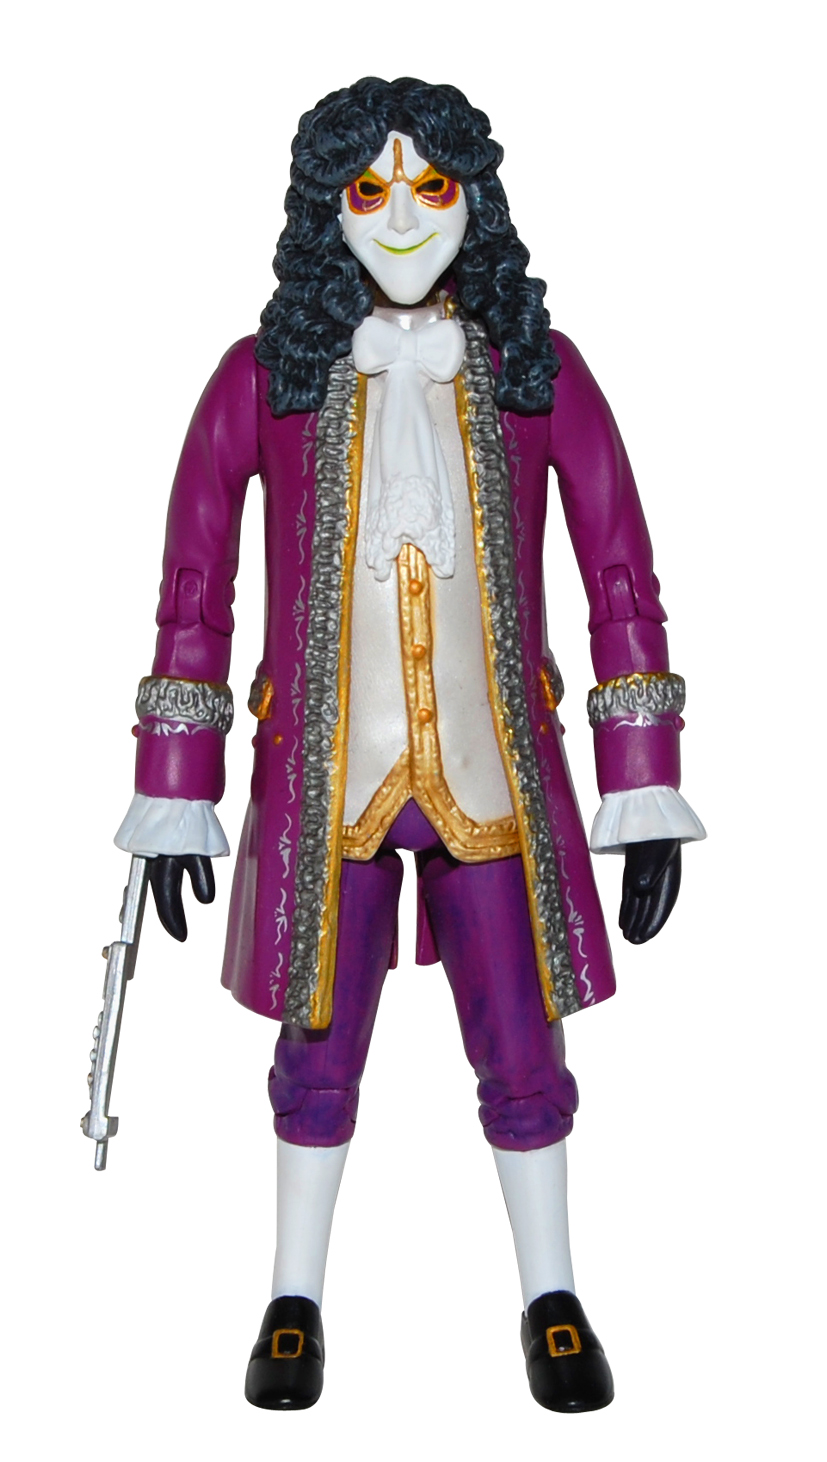 Unbranded Collect and Build Figs1 2and3- Purple Clockwork Man